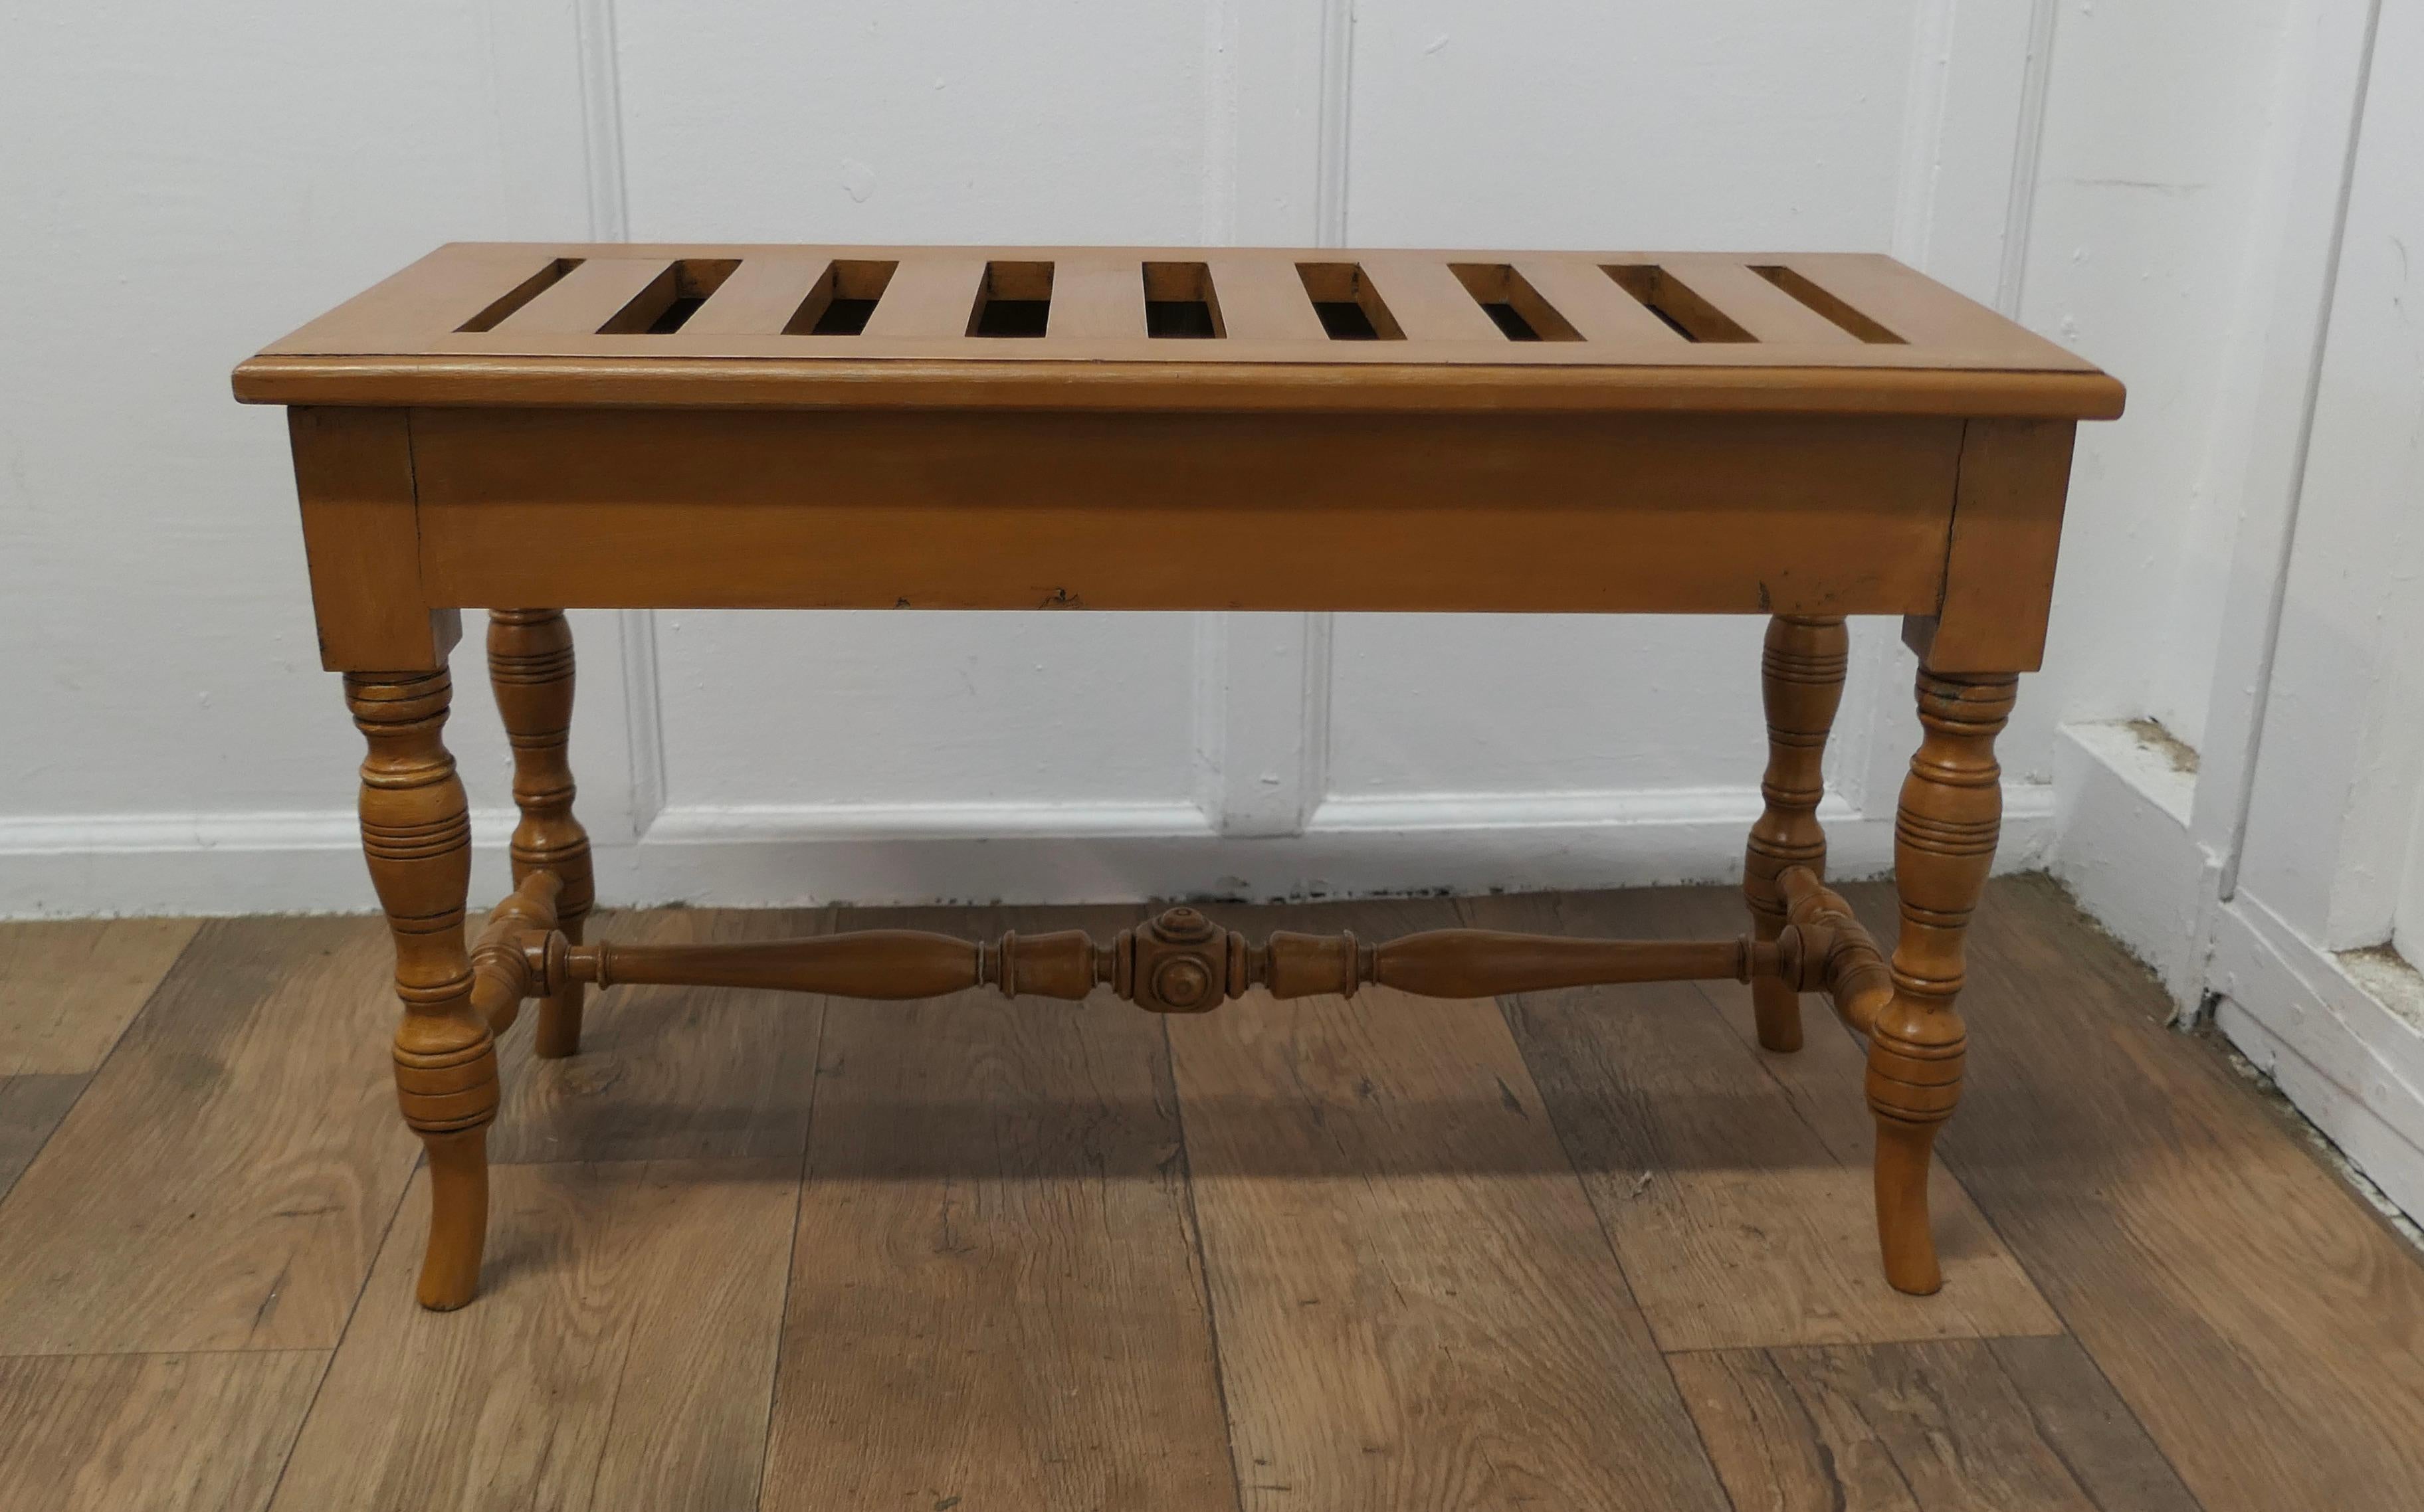 Arts and Crafts Oak Luggage Rack, Suitcase Stand

This is a Good Quality Victorian Luggage Rack, Suitcase Stand, it is made in Oak with turned legs and a slatted top
This is a good sturdy piece, with a golden coloured finish,
The stand is 31” long,